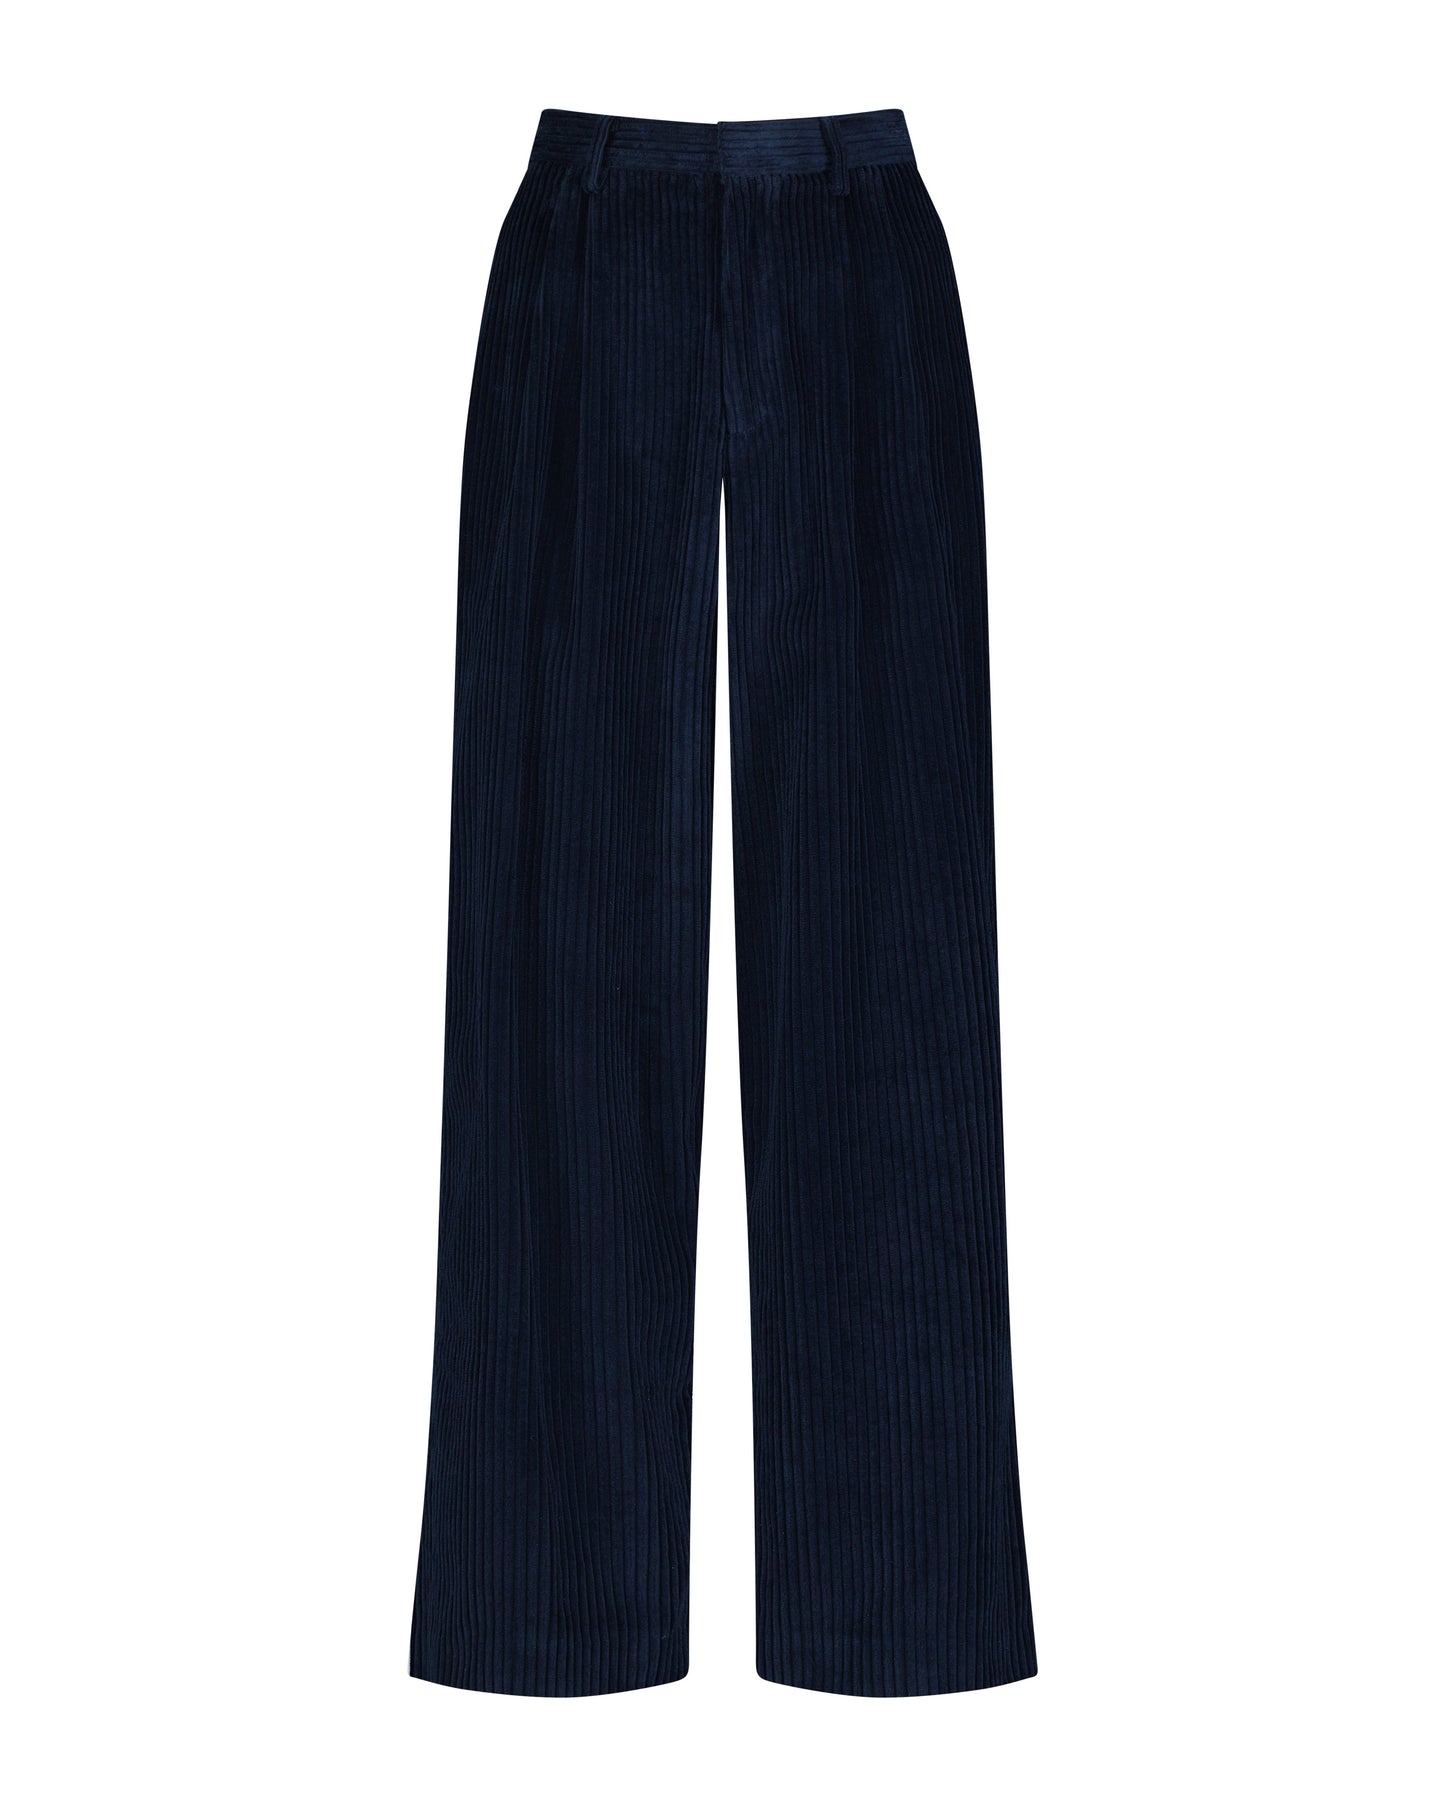 Charlize Pant in Corduroy - Navy Pants CHRISTINE ALCALAY   